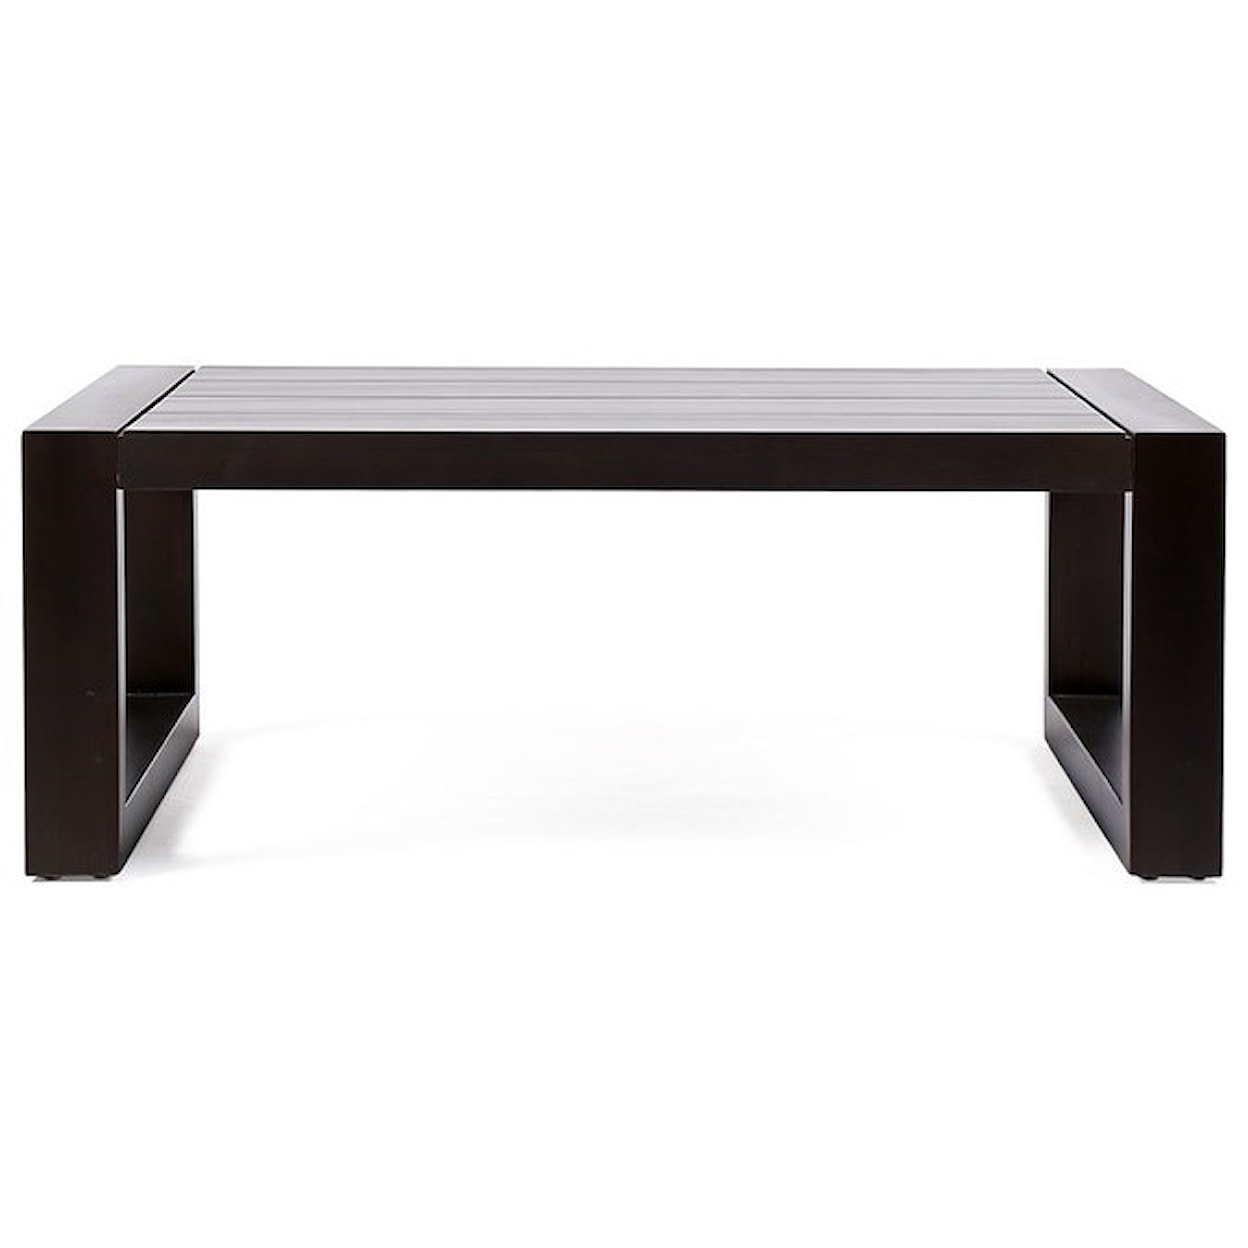 Armen Living Paradise Outdoor Patio Solid Wood Coffee Table